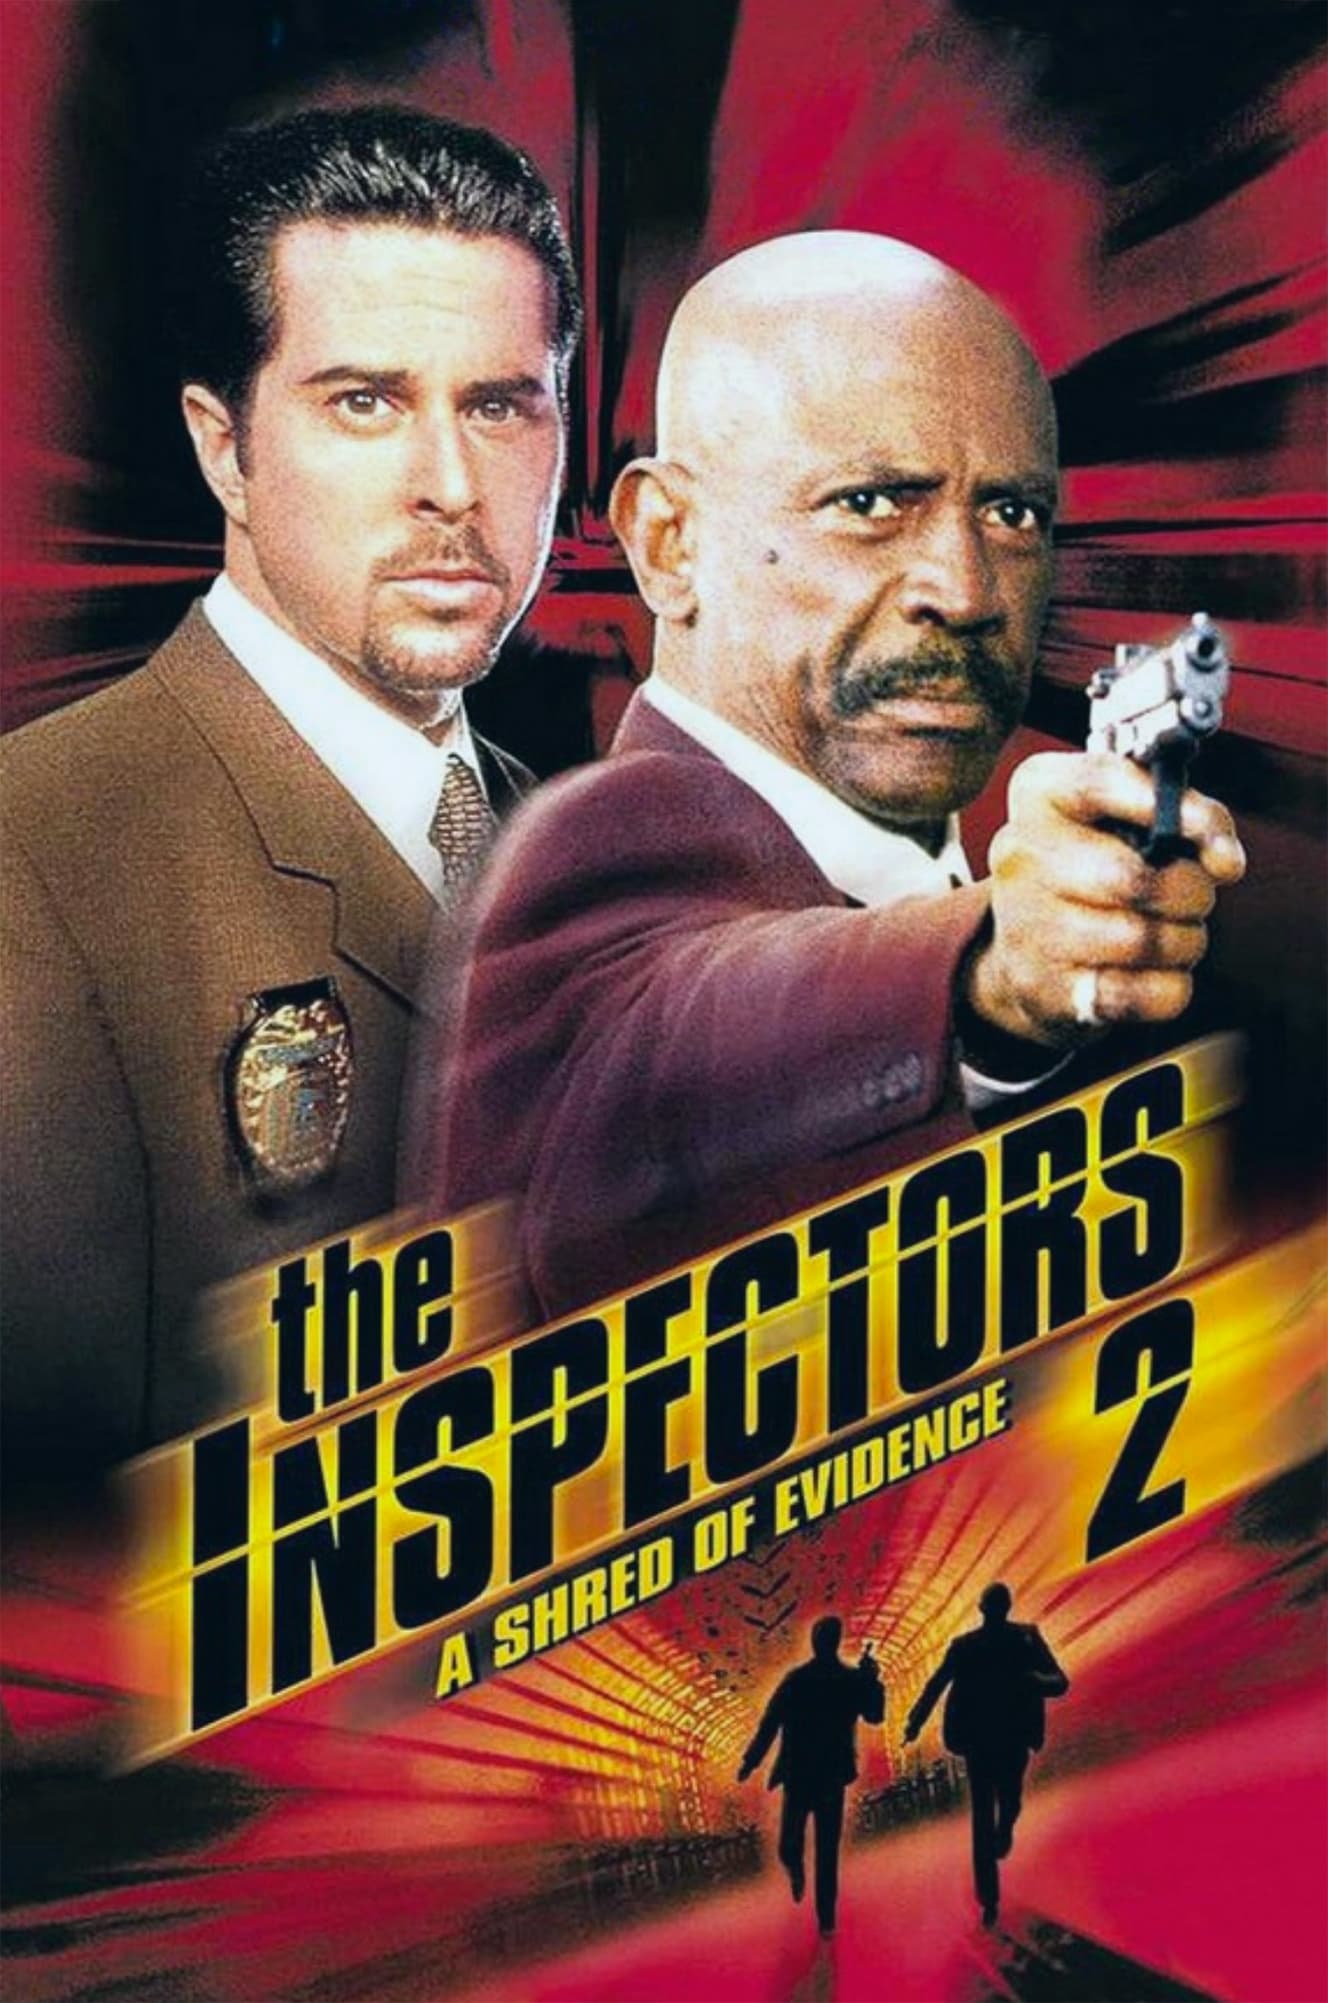 The Inspectors 2: A Shred of Evidence film